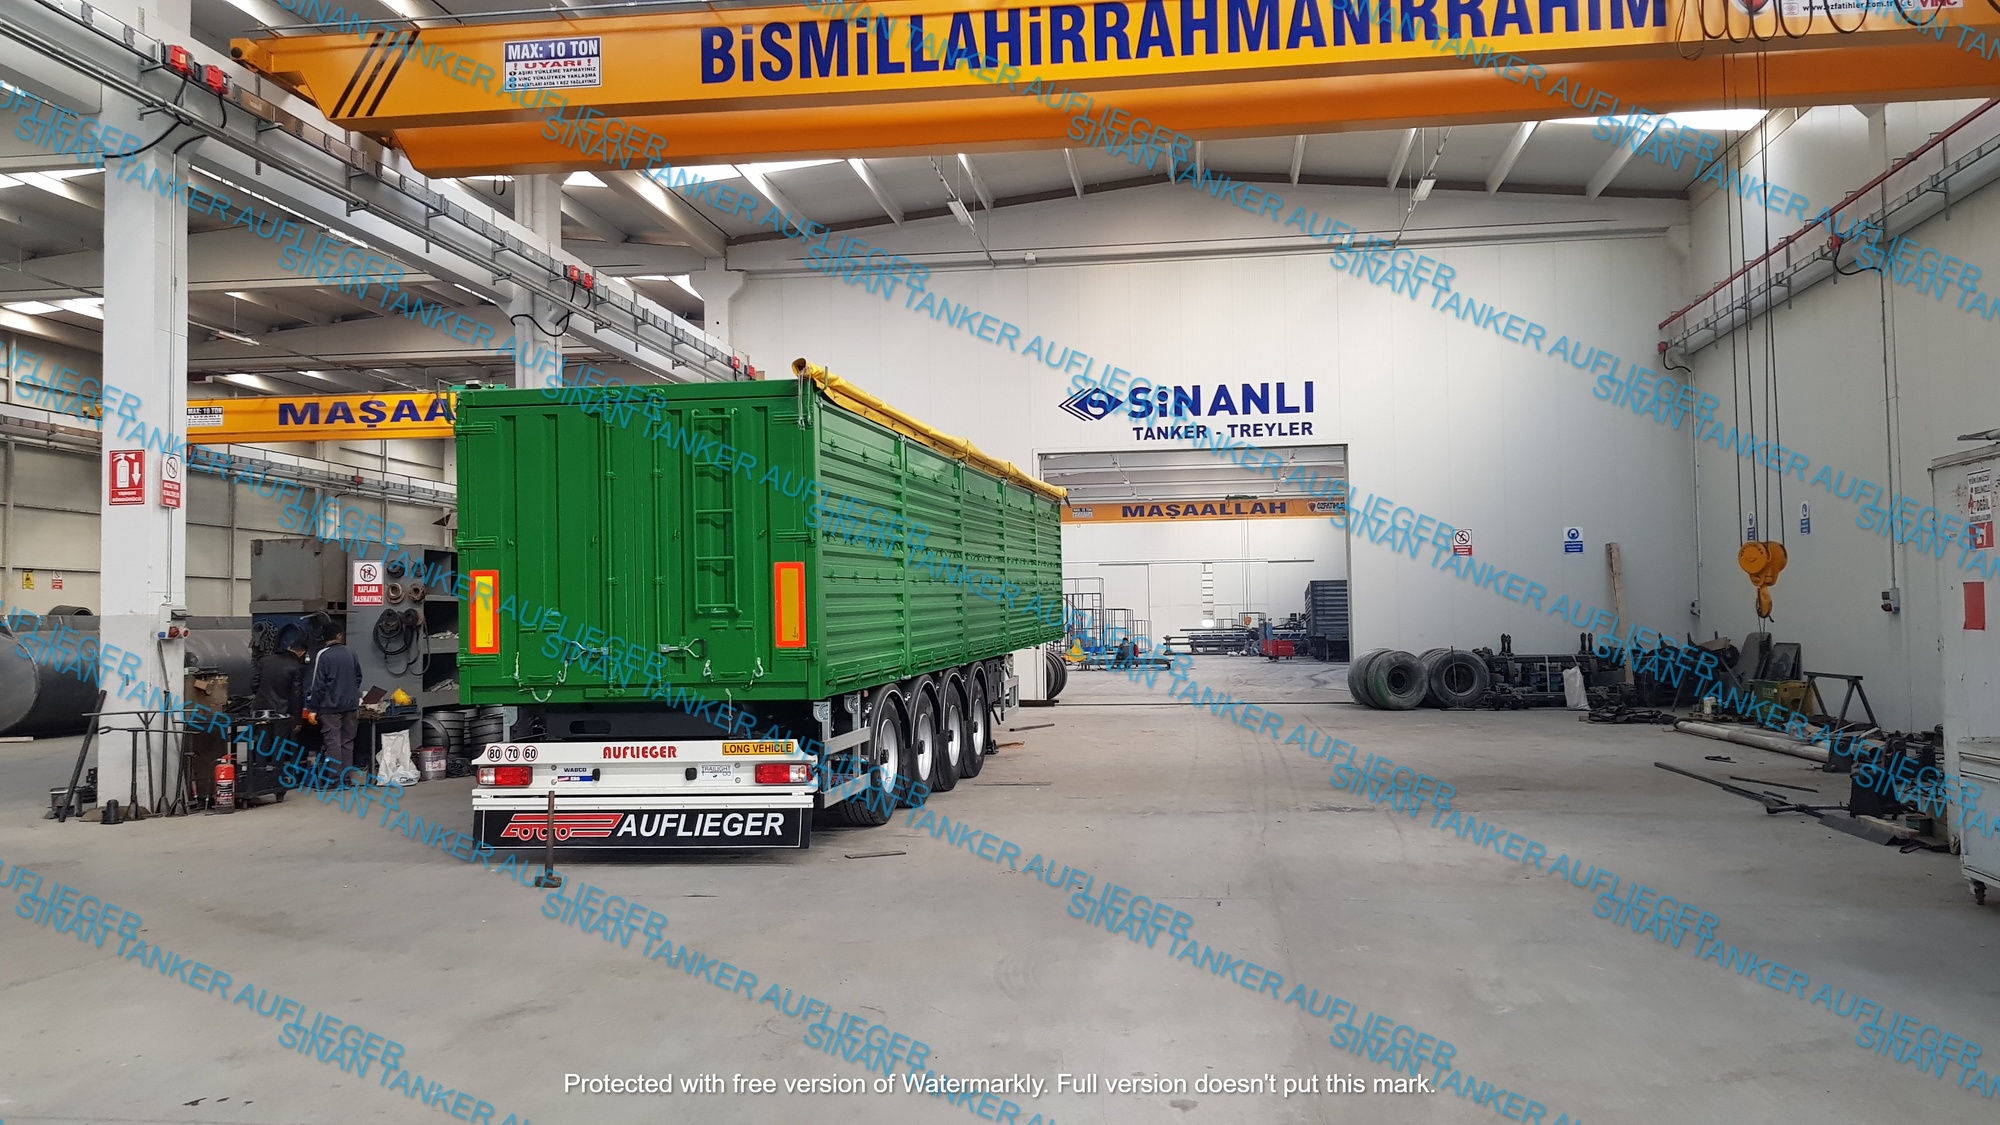 SİNANLI TANKER - TRAILER undefined: photos 2